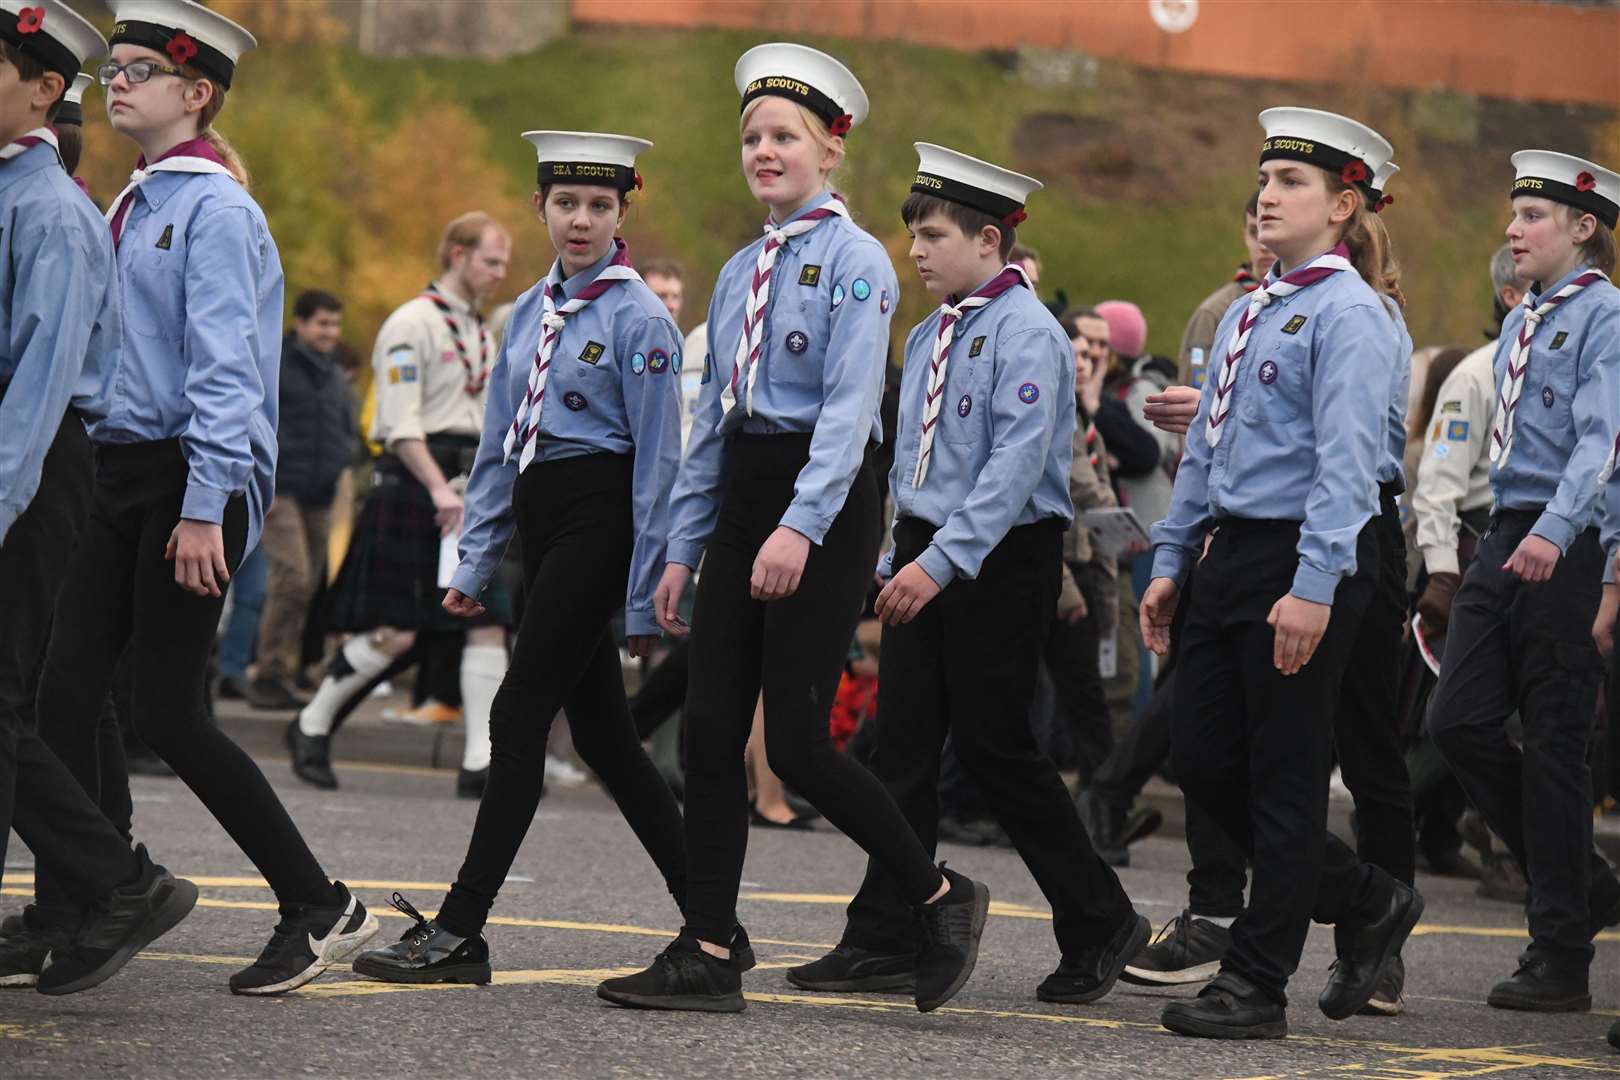 Many young people took part in the parade.